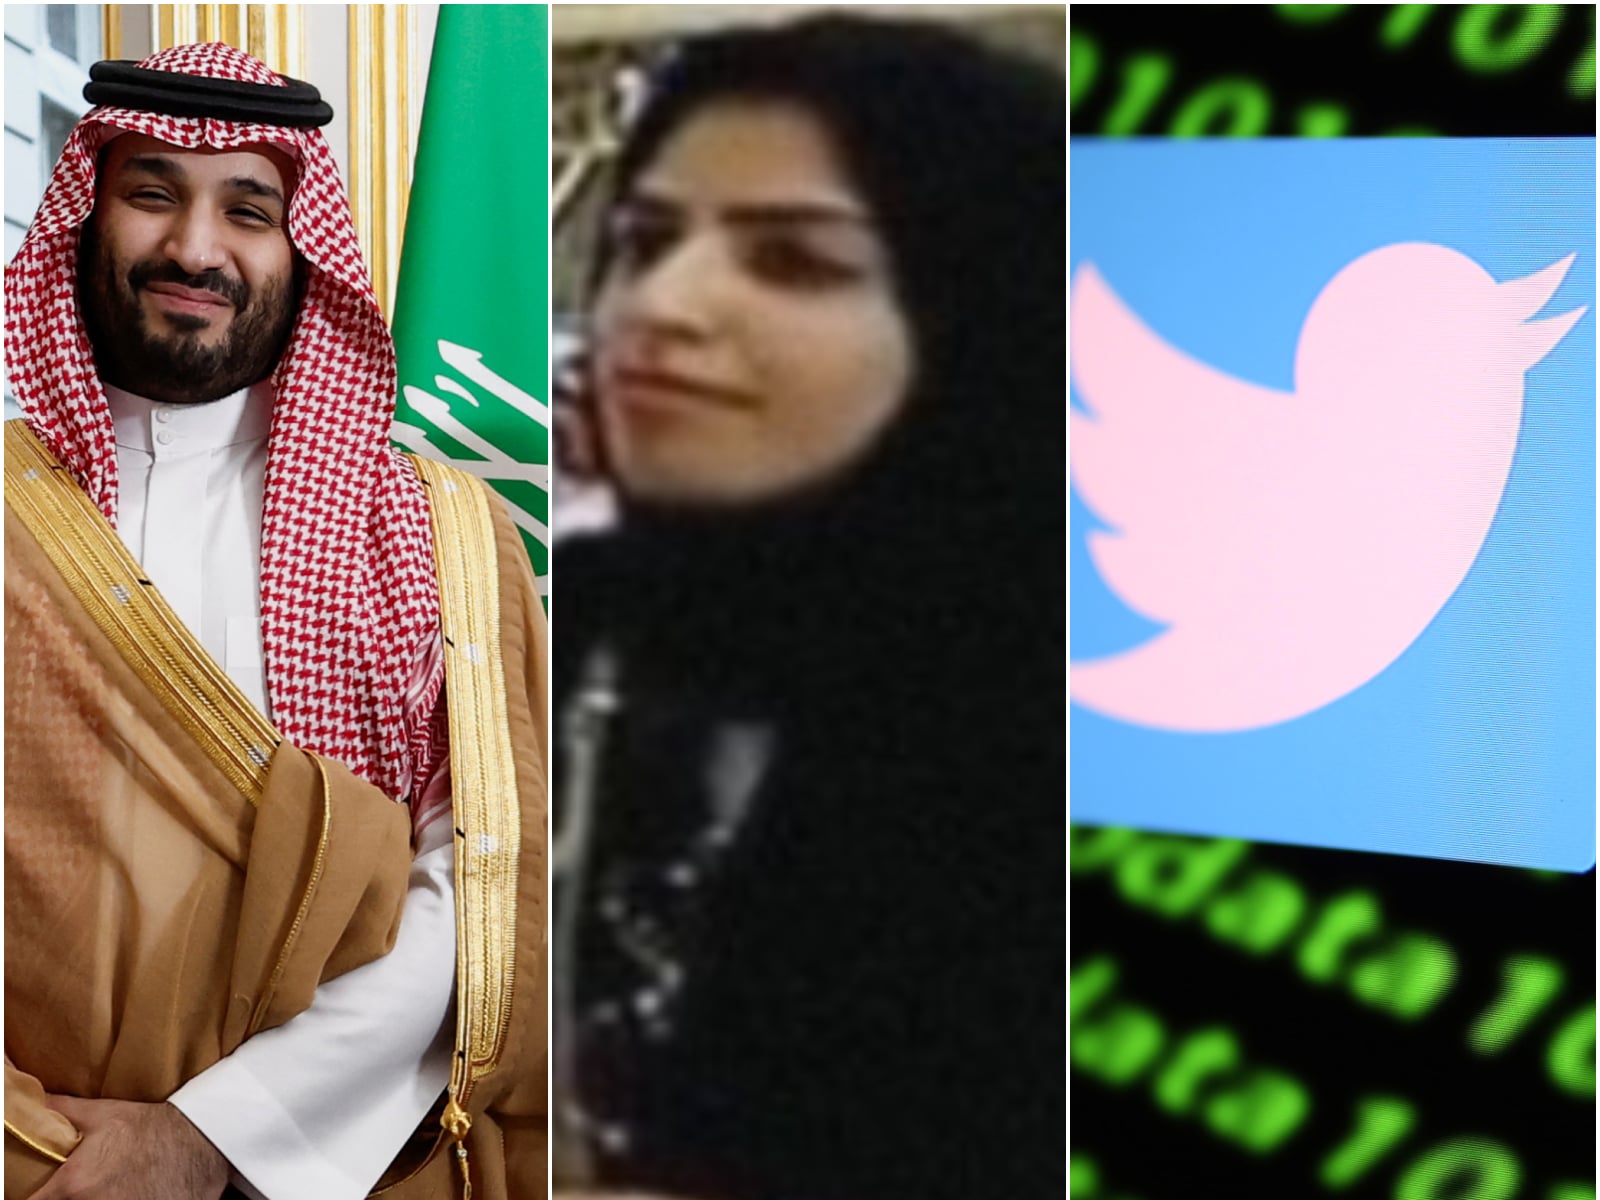 Phd Student Salma Shehab's 34-year Jail Sentence Shines Light on Twitter's  Troubled Ties With Saudi